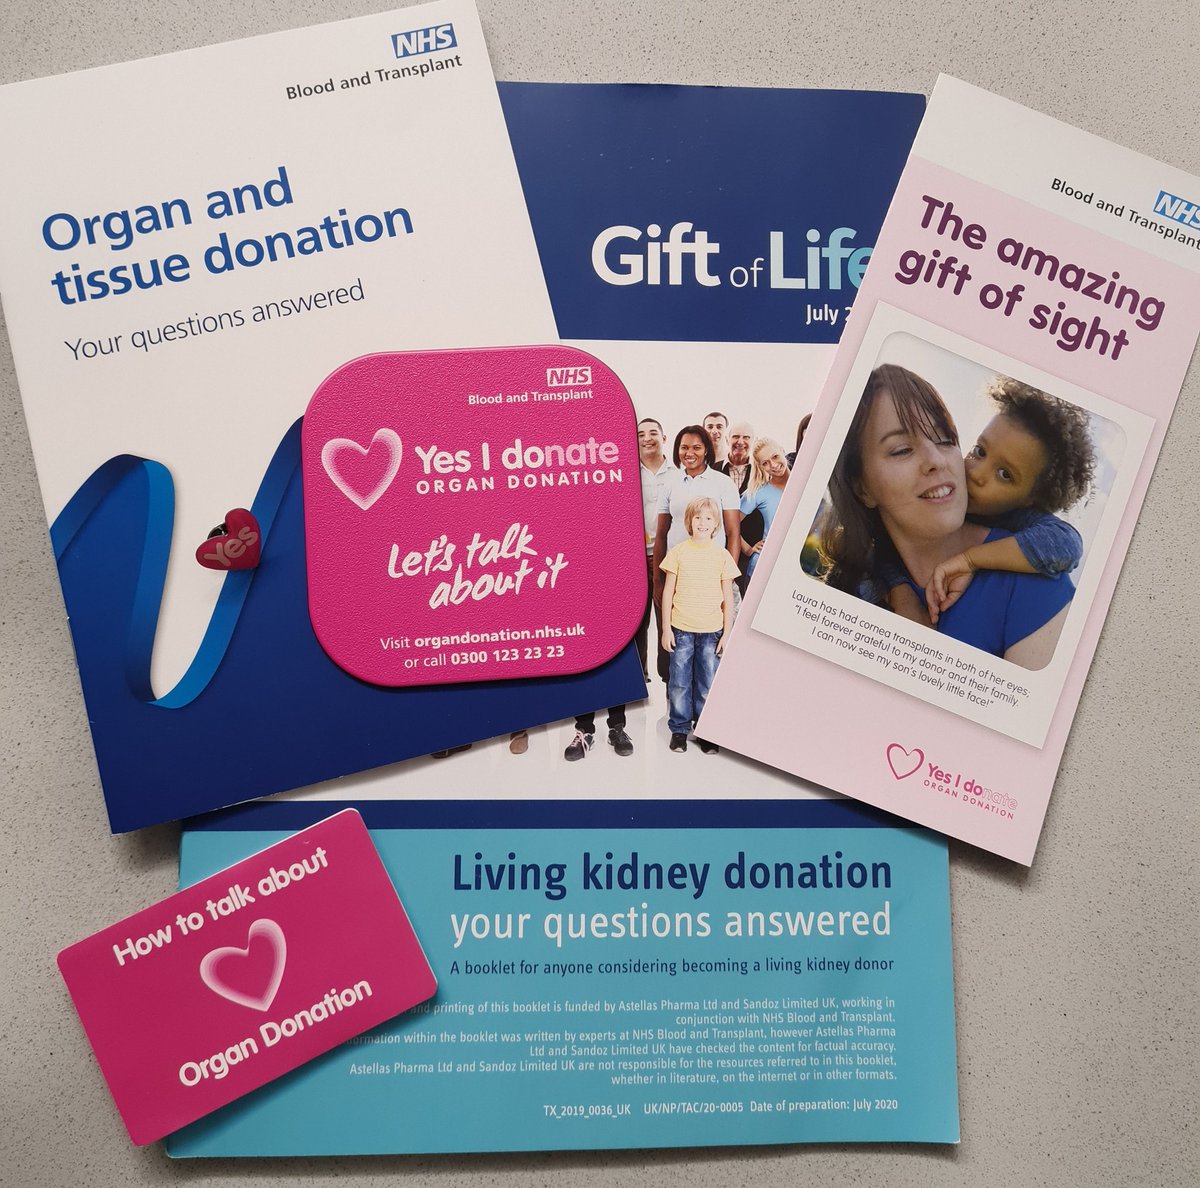 Amazing day at the Organ Donation study day @SouthTees valuable information on organ and tissue donation. Inspiring, emotional stories from donor families, such amazing people ❤️ and a fantastic talk on upper limb transplants, living kidney donations. @NHSOrganDonor @NHSBT